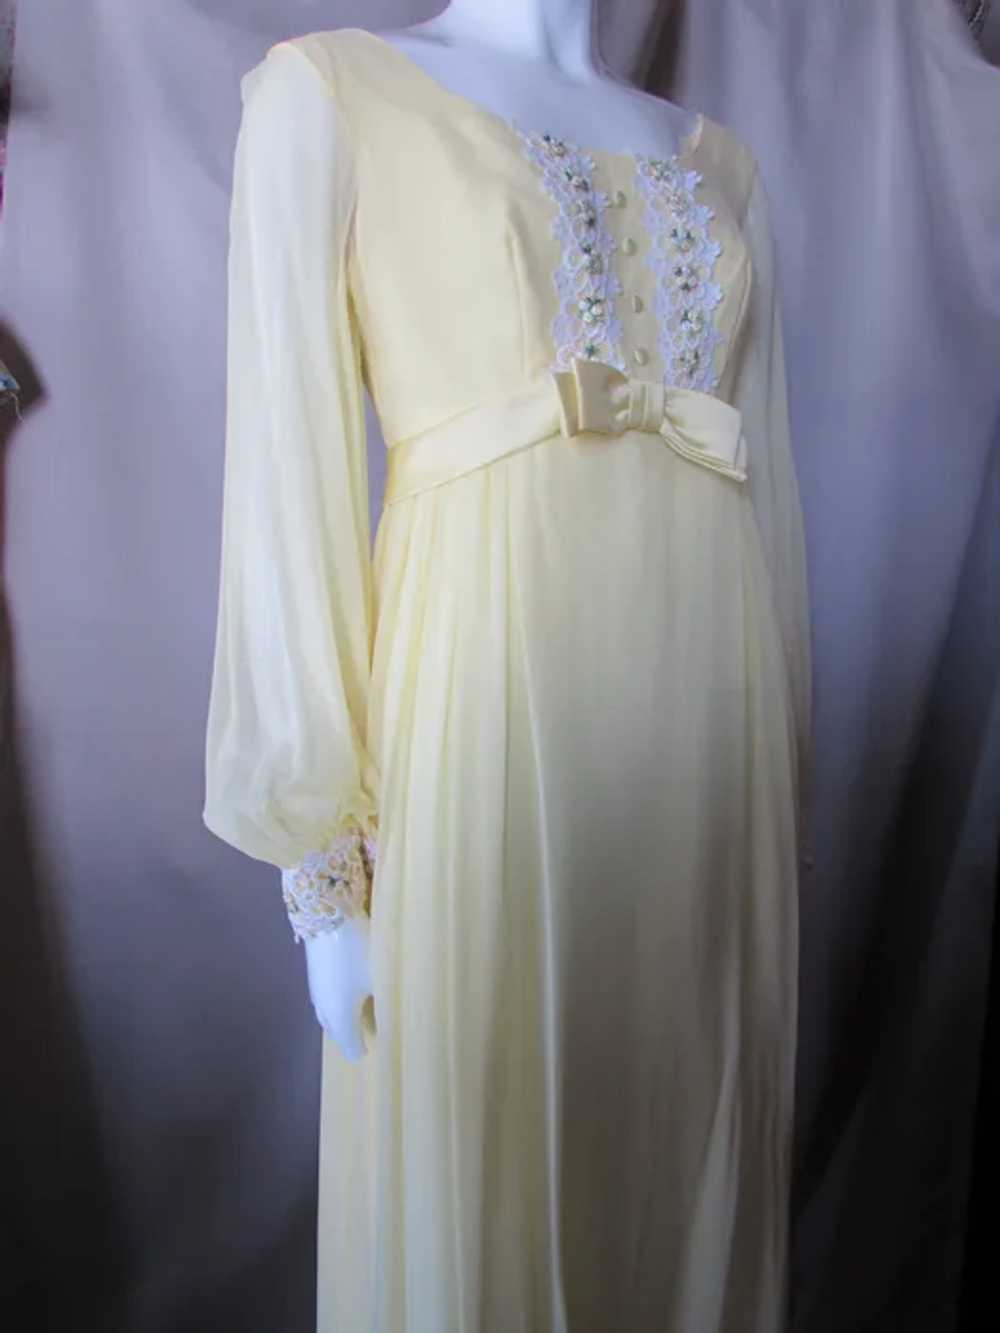 SALE Lovley 1970 Era Bridesmaid or Prom Dress in … - image 3